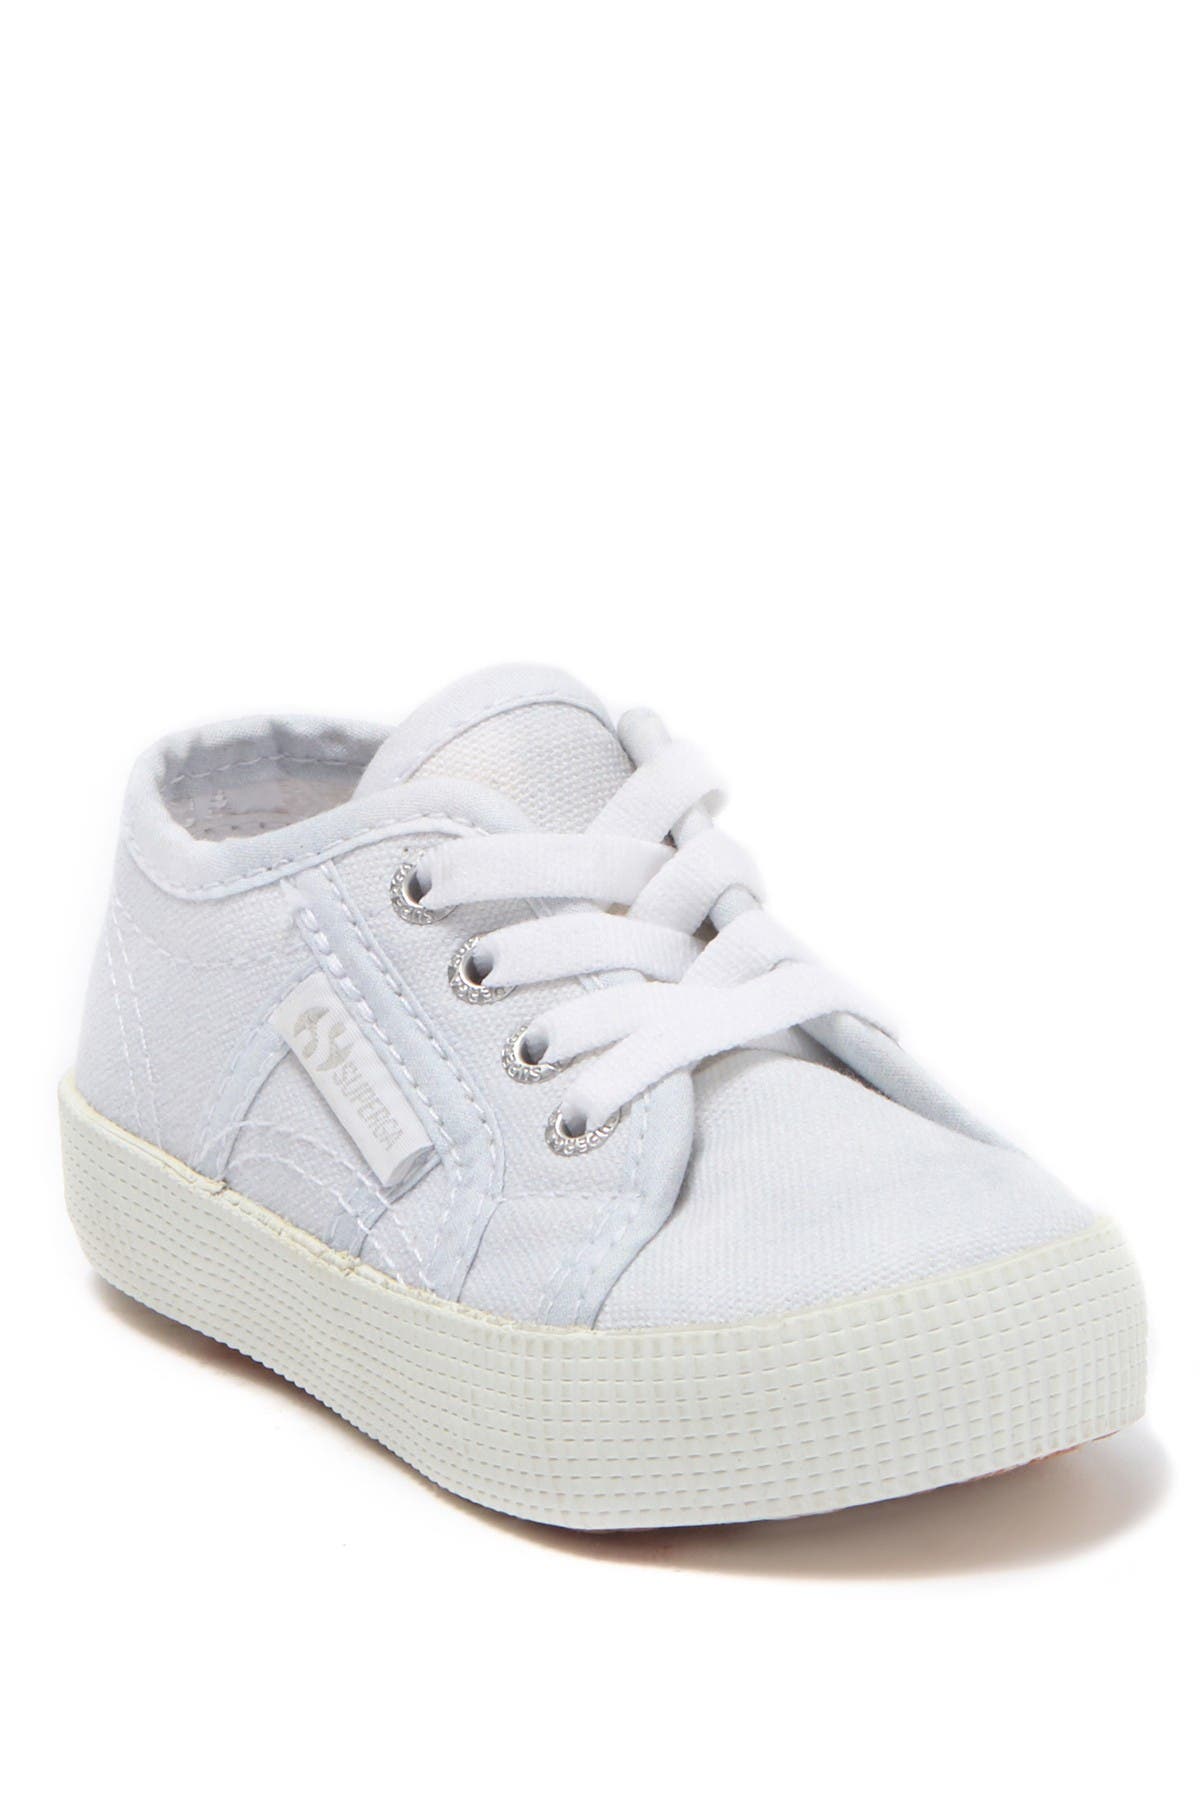 superga classic lace up sneakers